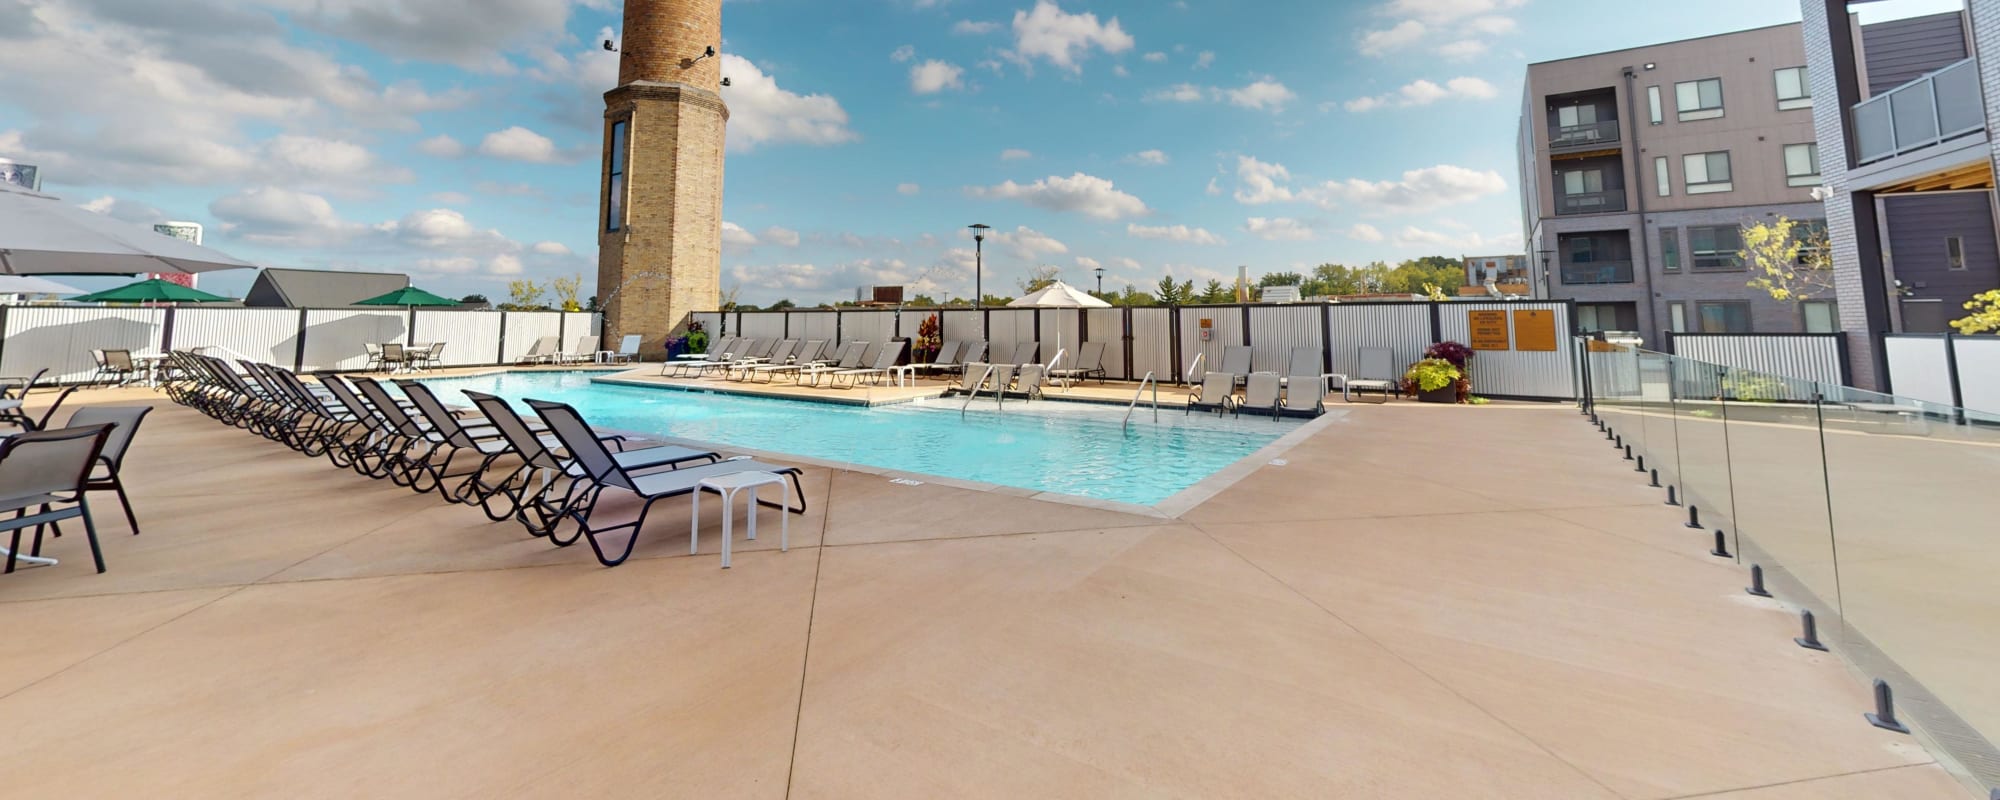 Residential Pool Deck at Factory 52 Apartments in Norwood, OH